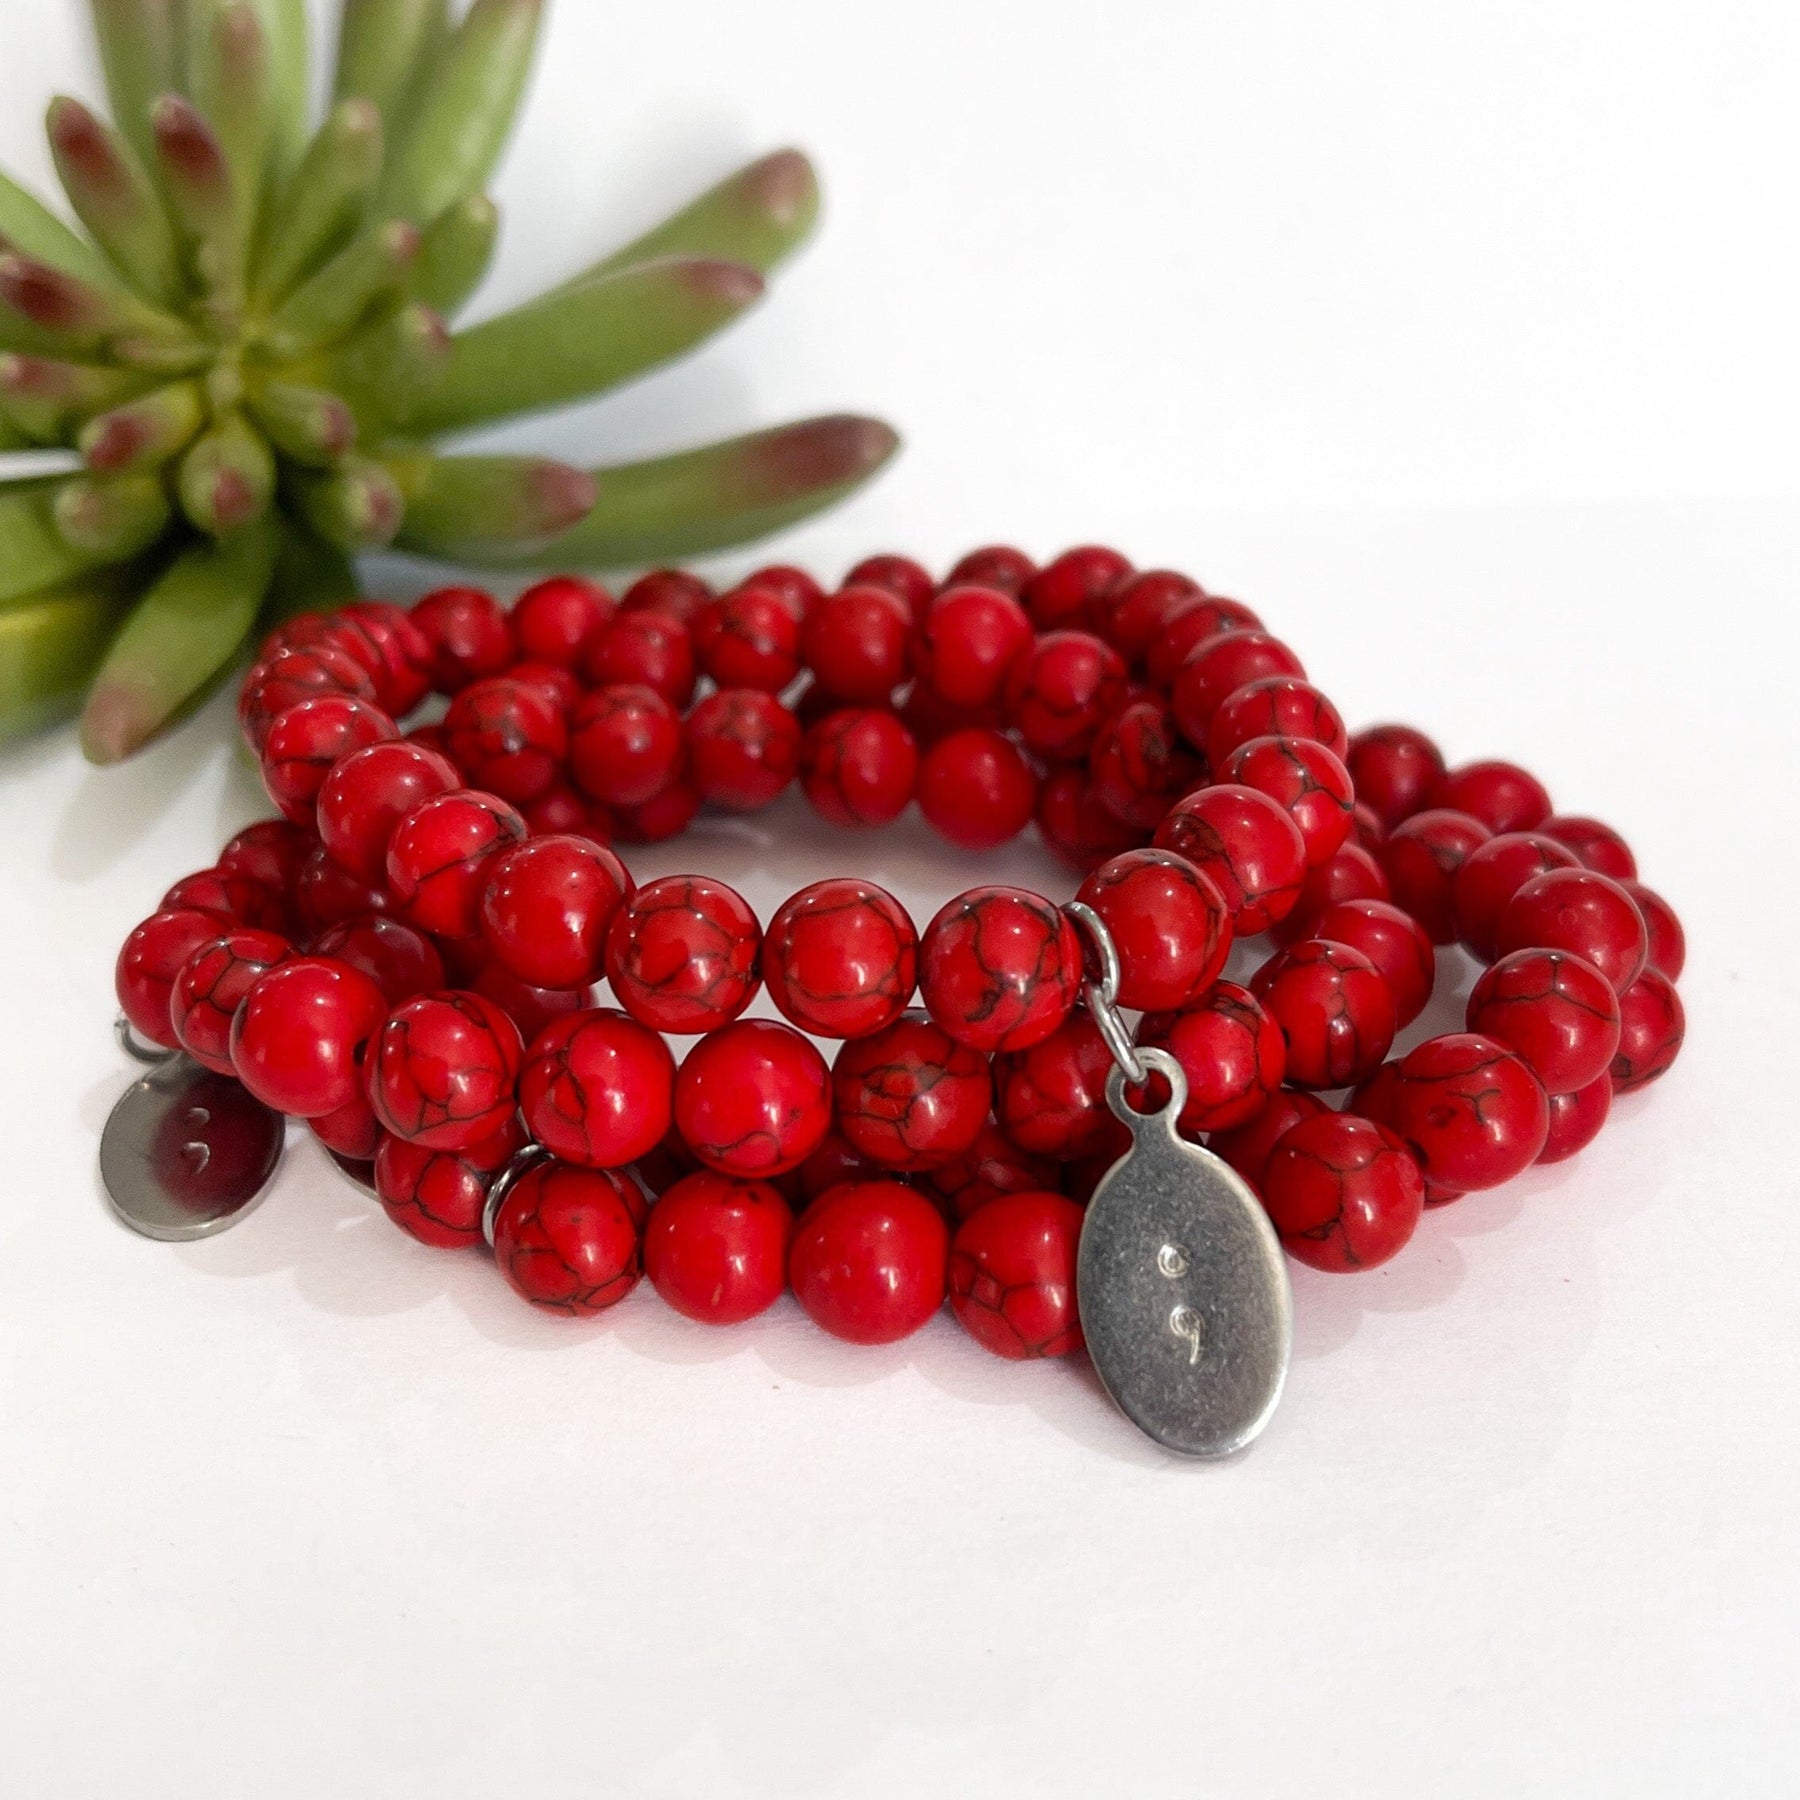 Natural Stone Bracelet with Letter Beads – CoupleGifts.com